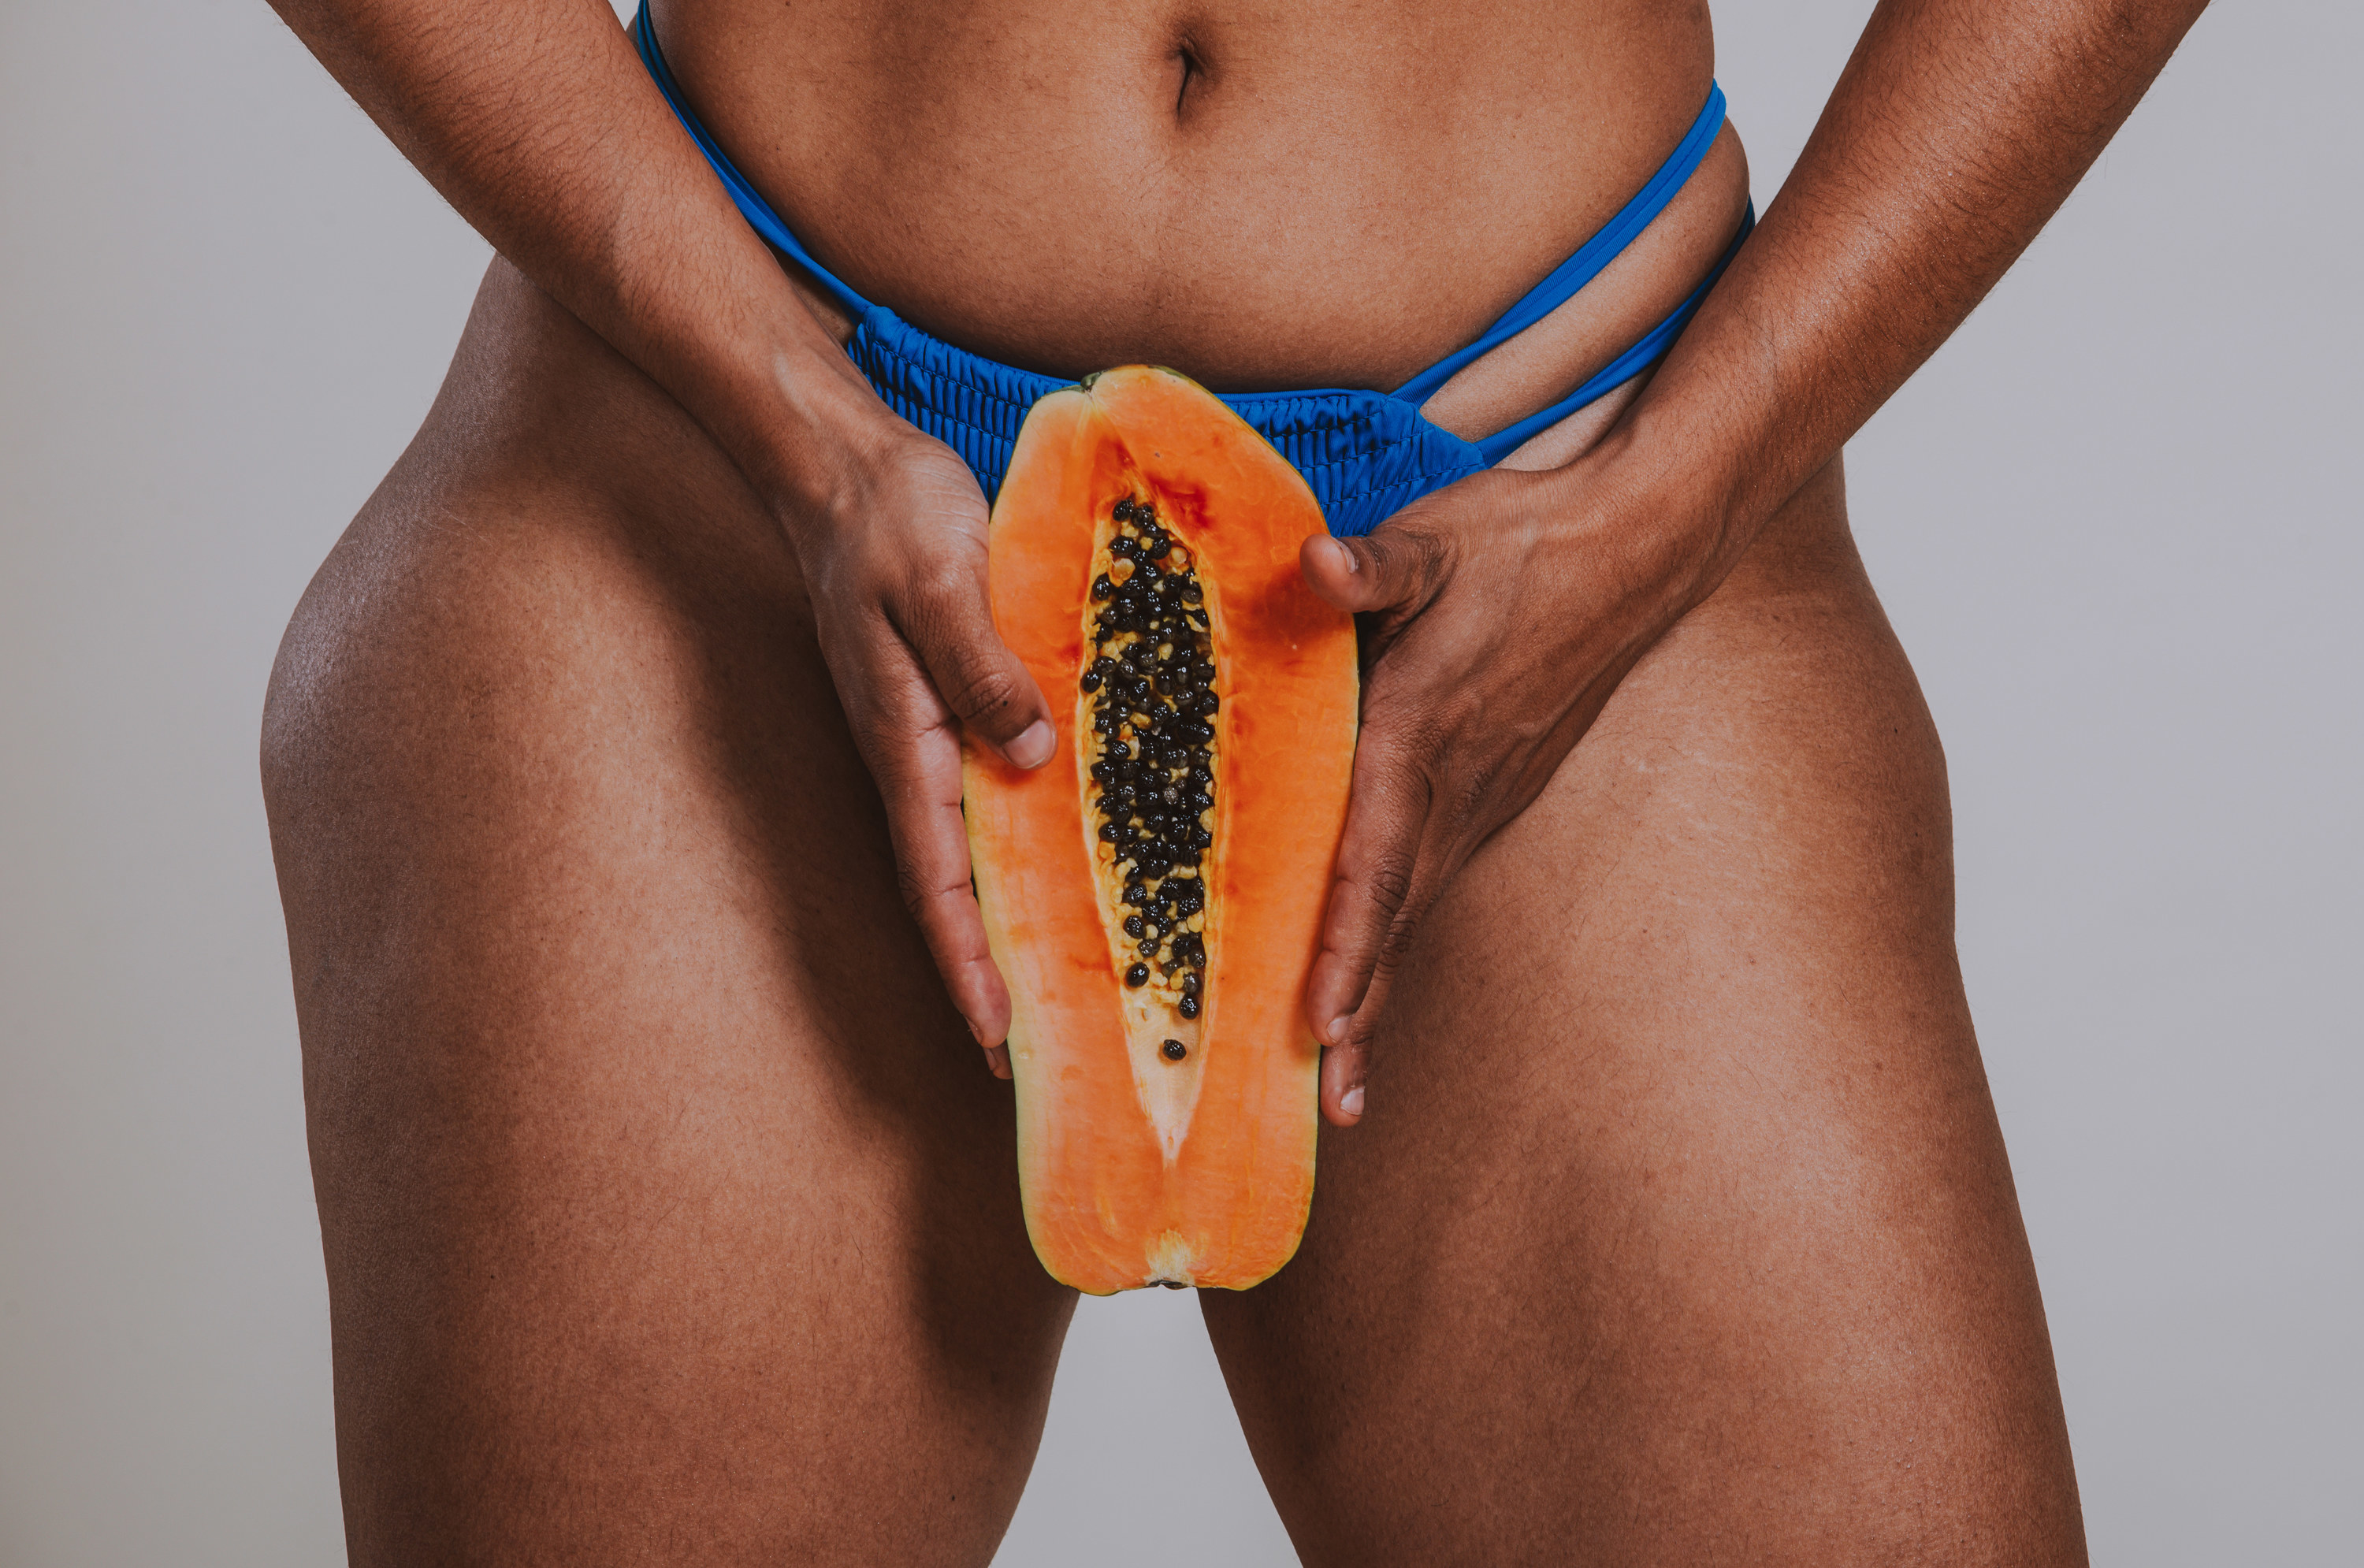 An image of a woman holding a papaya in front of her pelvic region